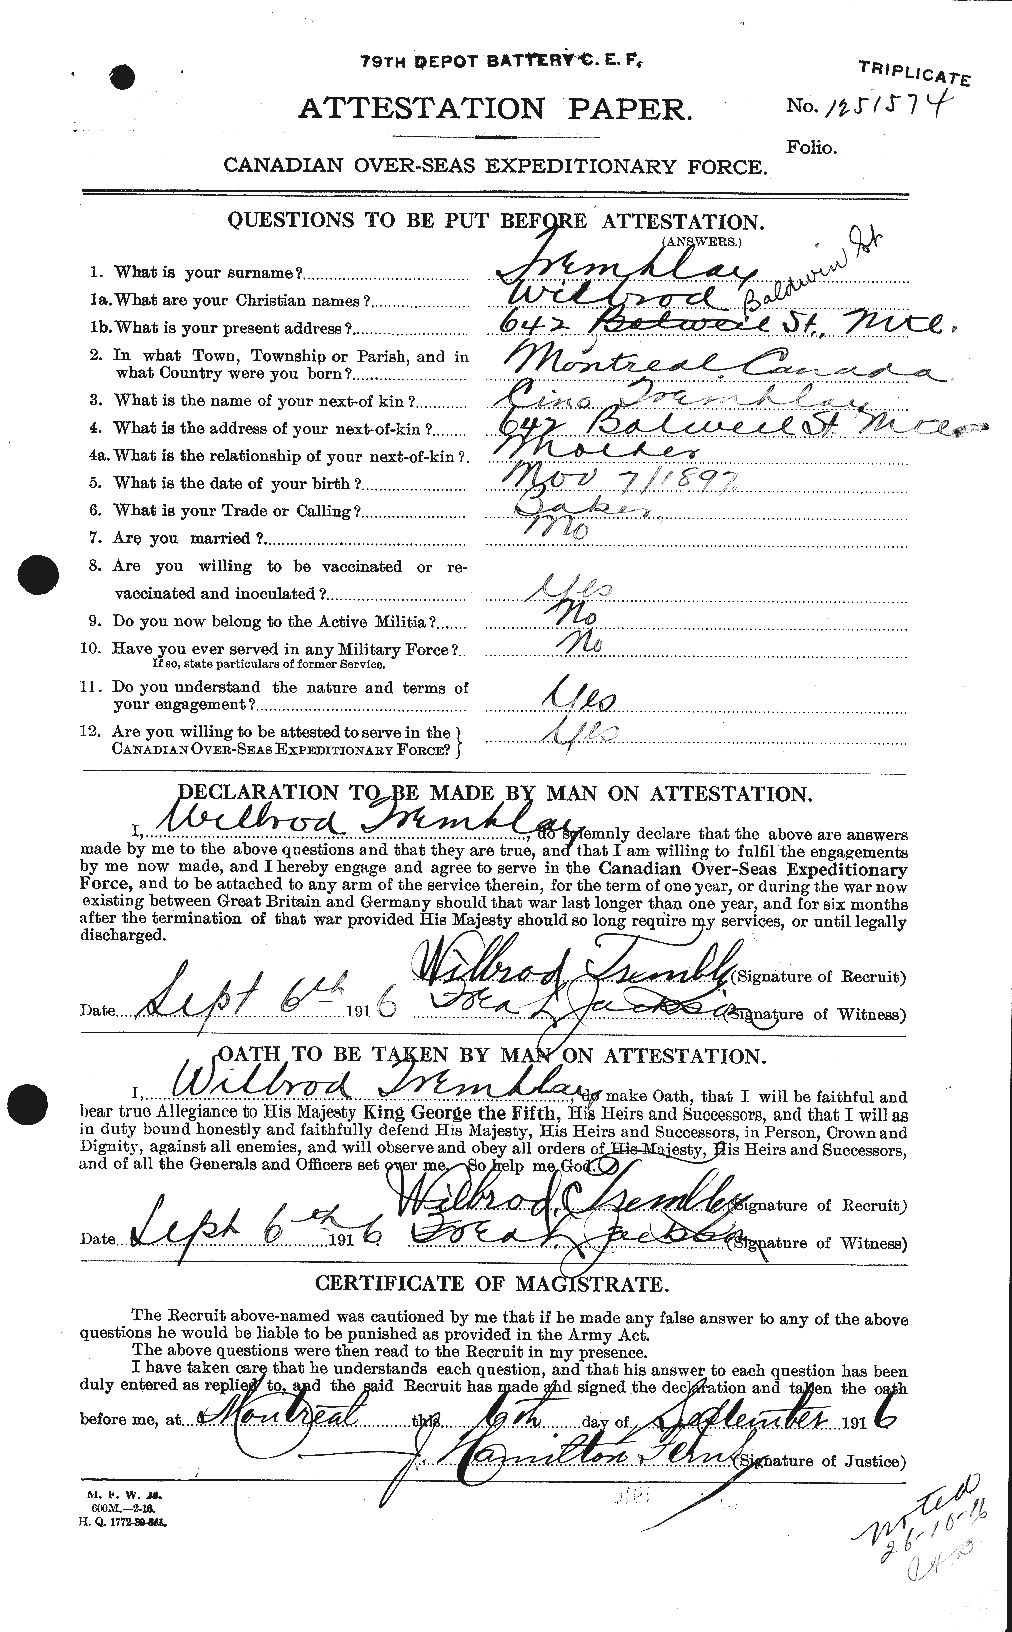 Personnel Records of the First World War - CEF 638340a